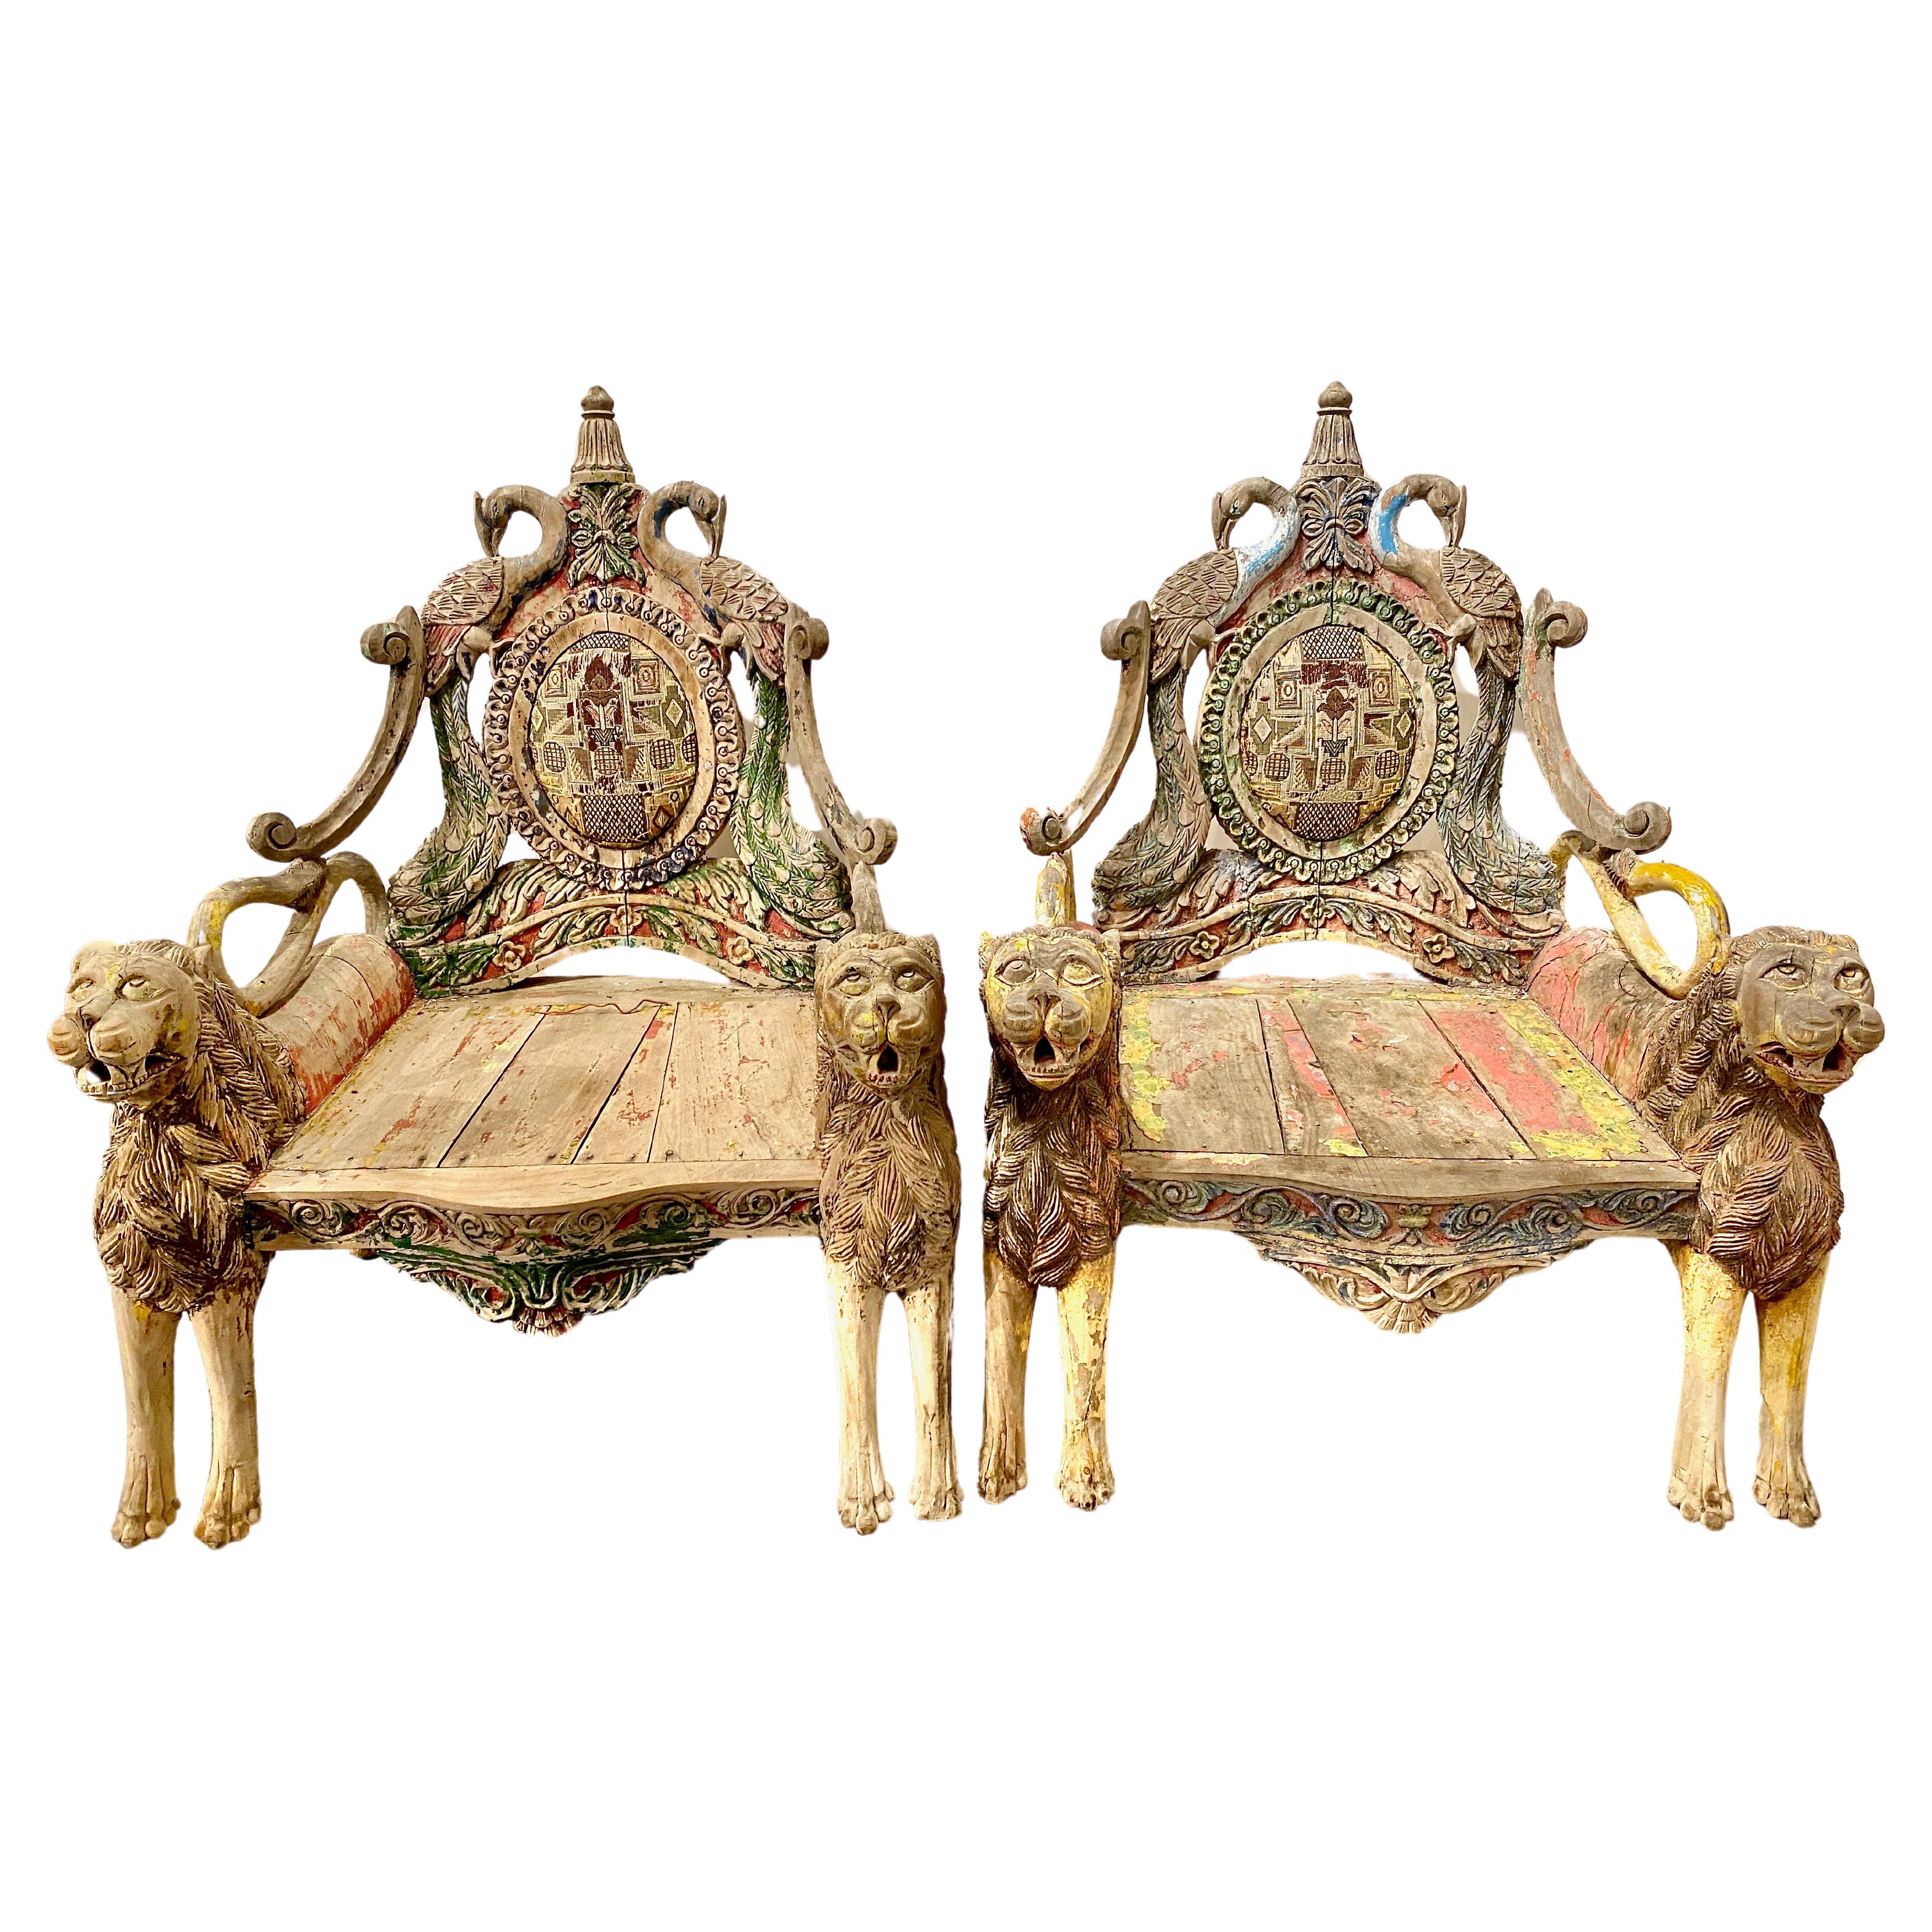 This is an extraordinary pair of Indian Throne or elaborate antique Ceremonial Chairs. The chairs are composed of pairs of fully carved lions supporting the wide seats whose backs incorporate carved peacocks surmounted by crowns. The scrolling lion